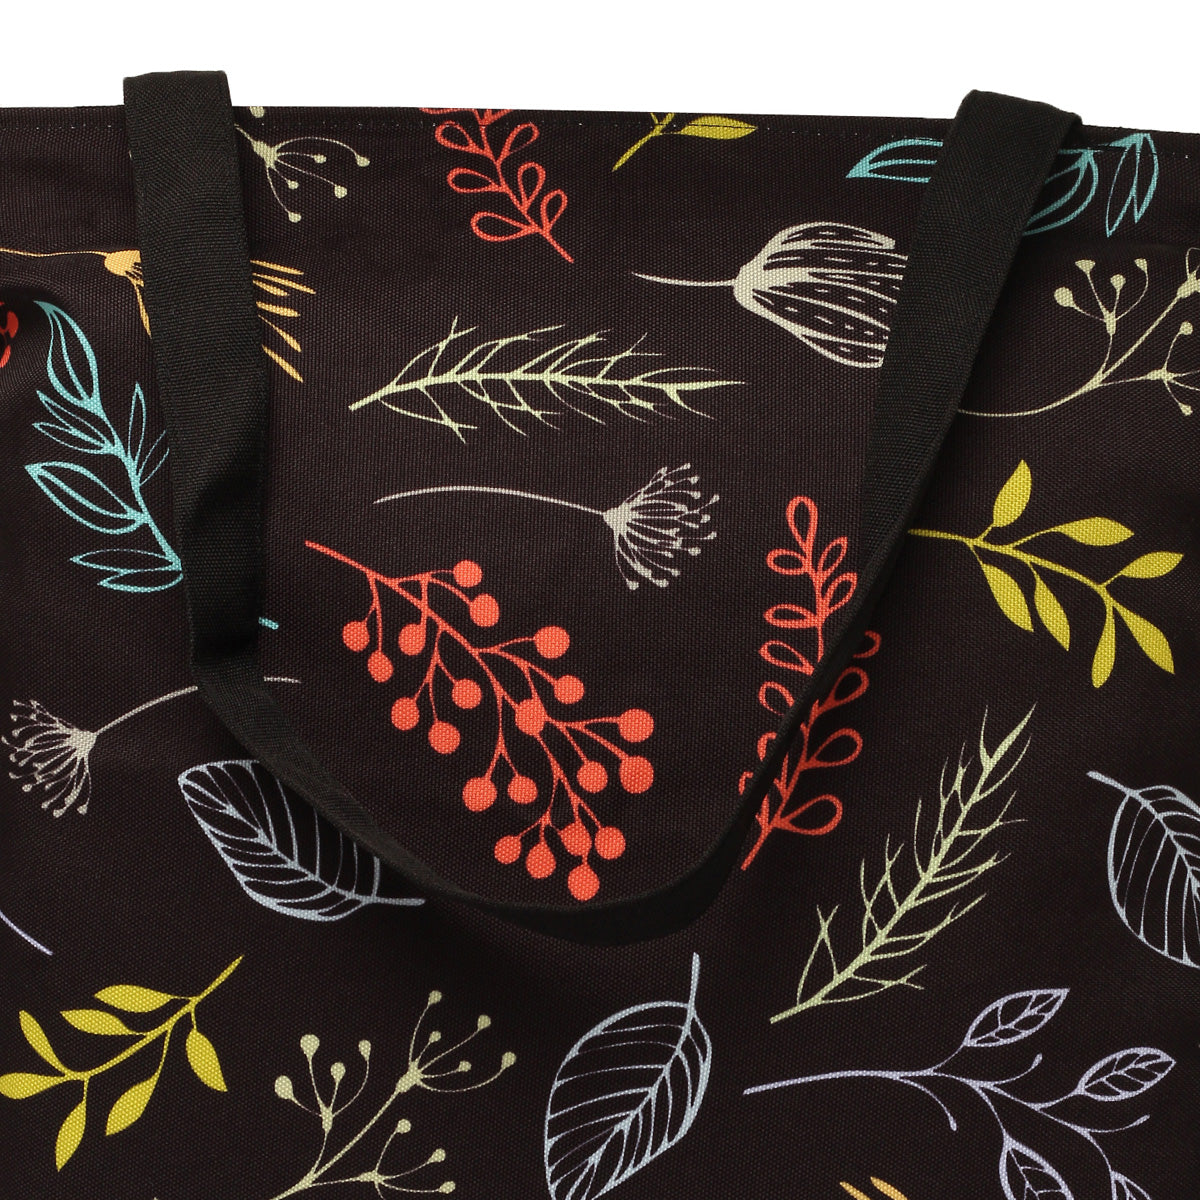 Zoom view of Black tote bag featuring colorful leaves and flowers.